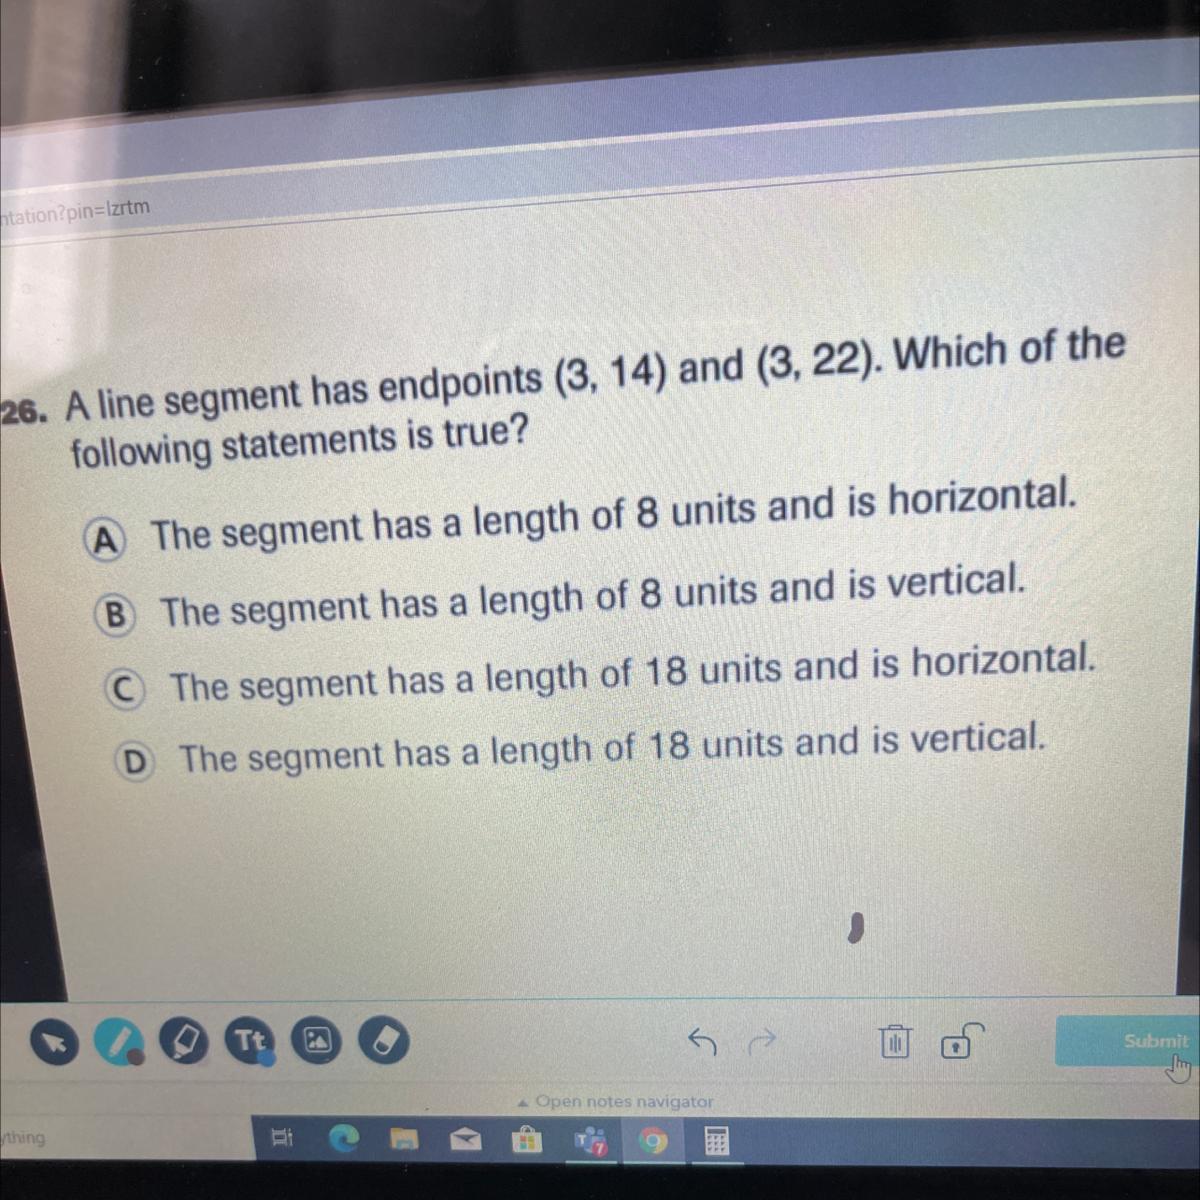 Need Help ASAP !! A Line Segment Has Endpoints(3,14) And (3,22) Which Of The Following Statements Is